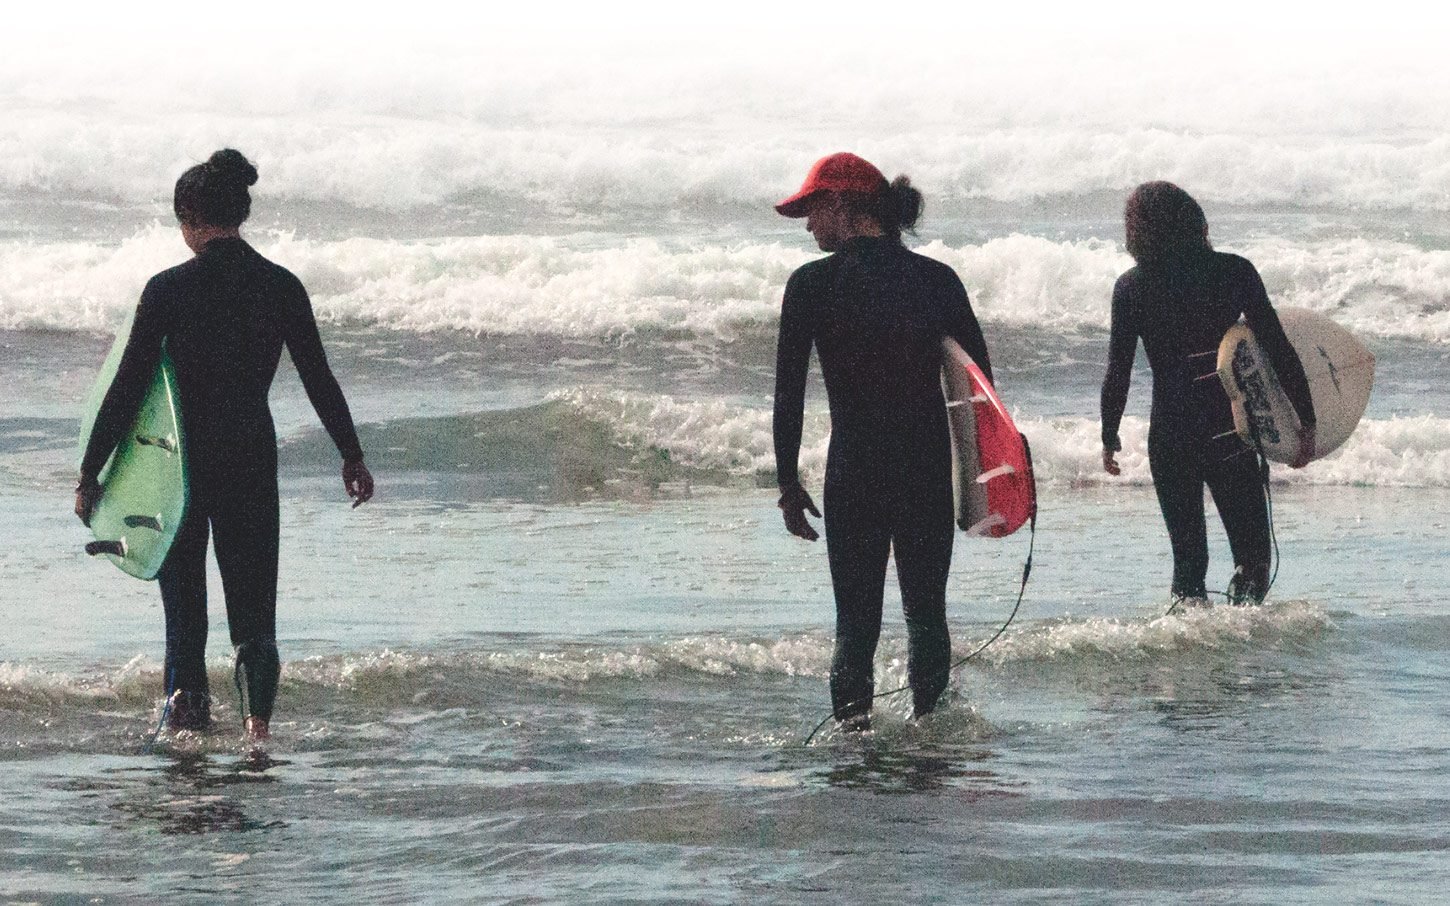 Surfers heading out with their boards in Tofino, British Columbia